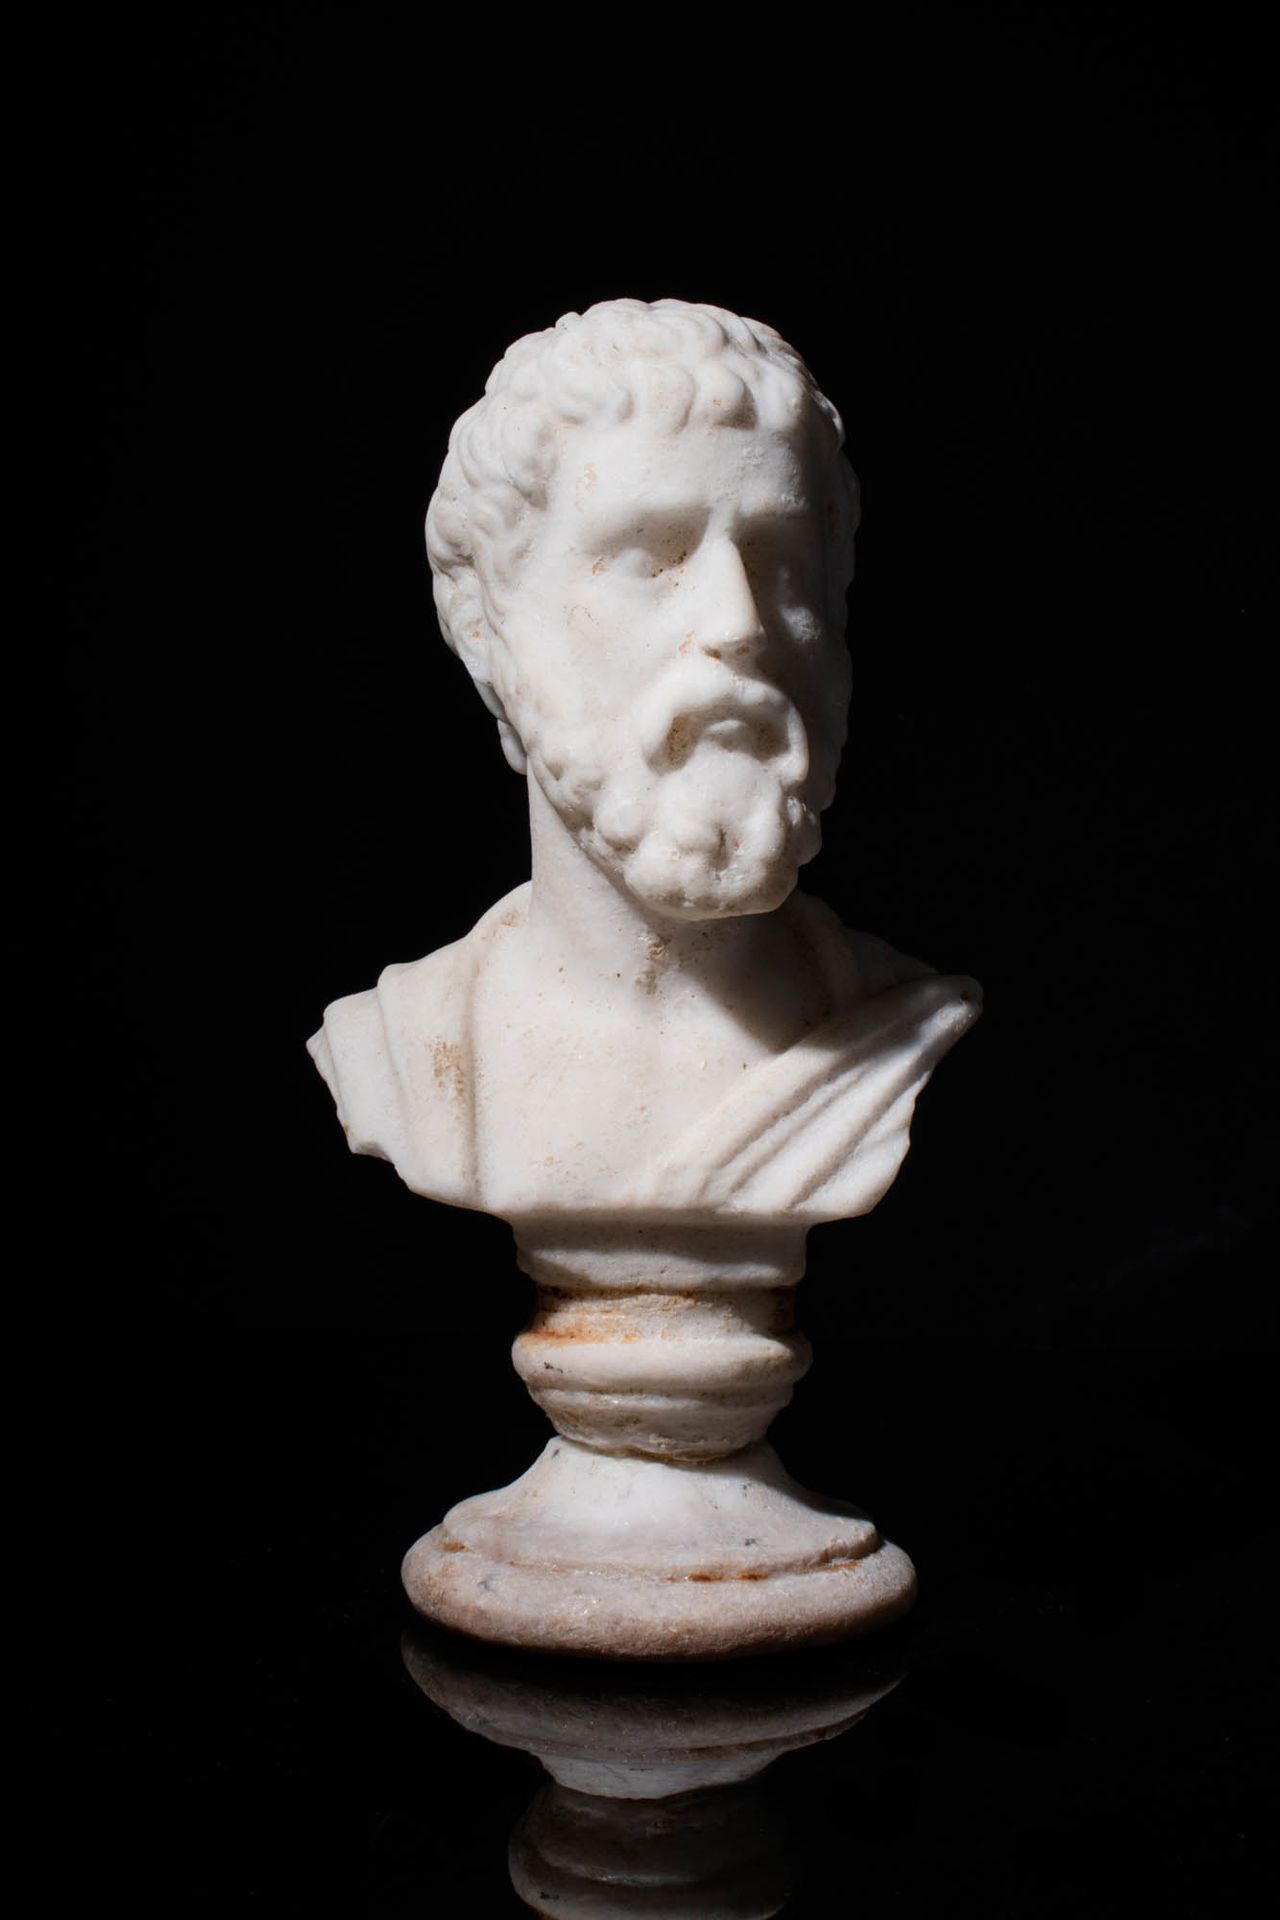 NEOCLASSICAL MARBLE BUST OF AN EMPEROR - MARCUS AURELIUS Ca. 19th century AD.
A &hellip;